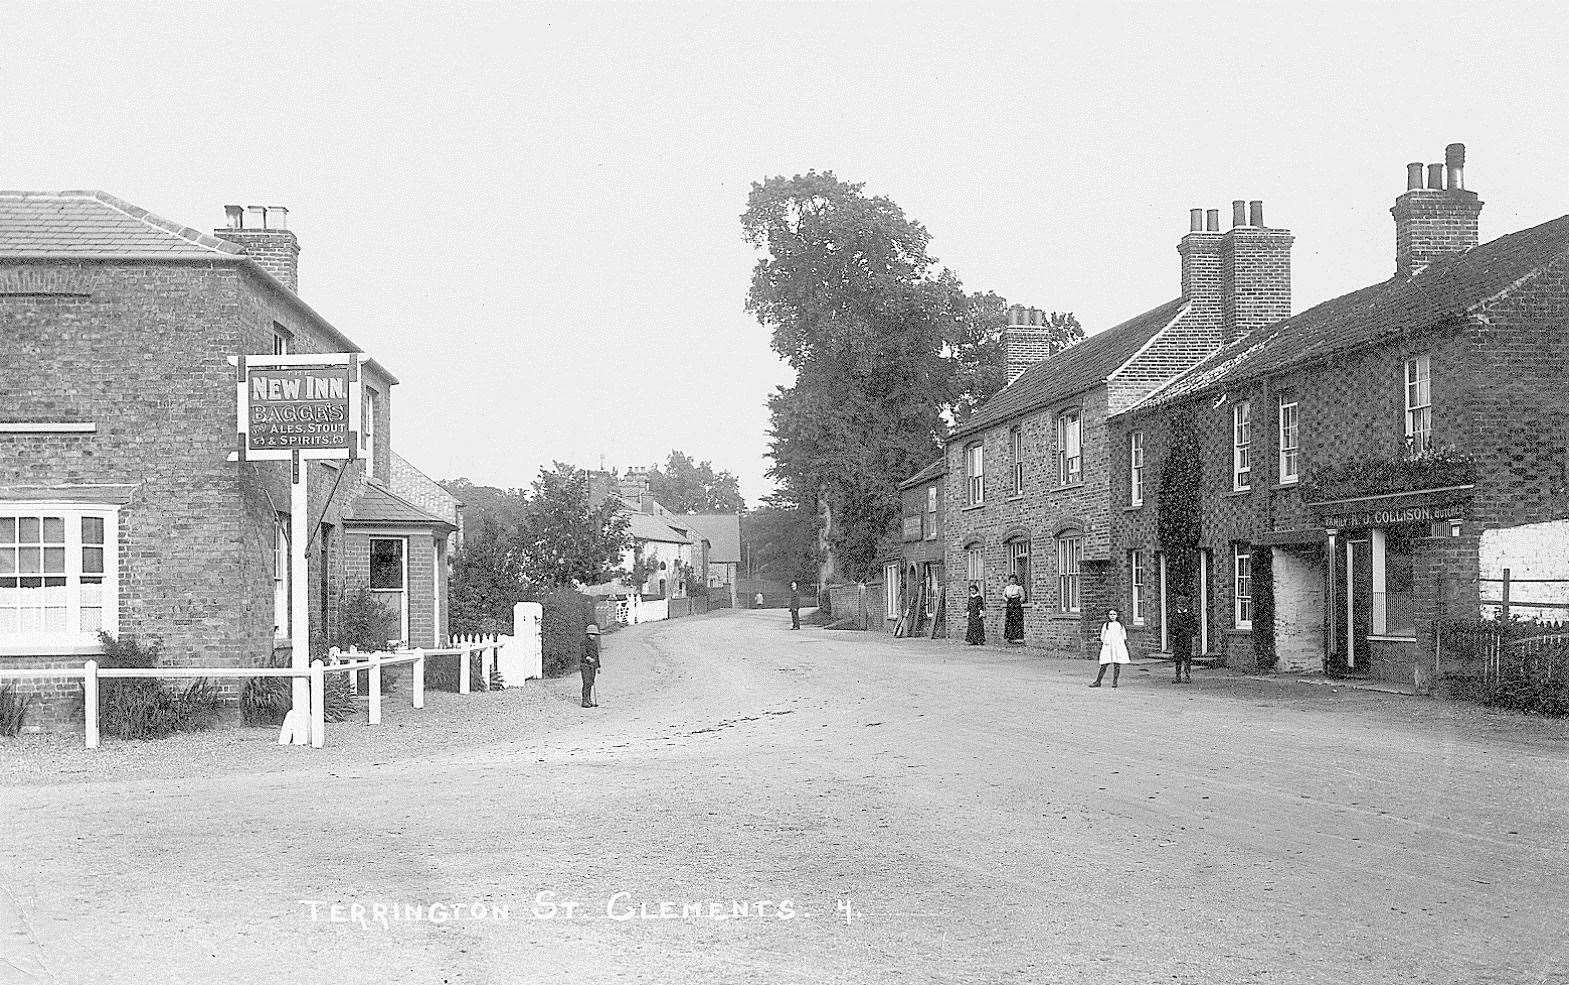 From Bryan's archives: The New Inn, Terrington - now The Wildfowler.